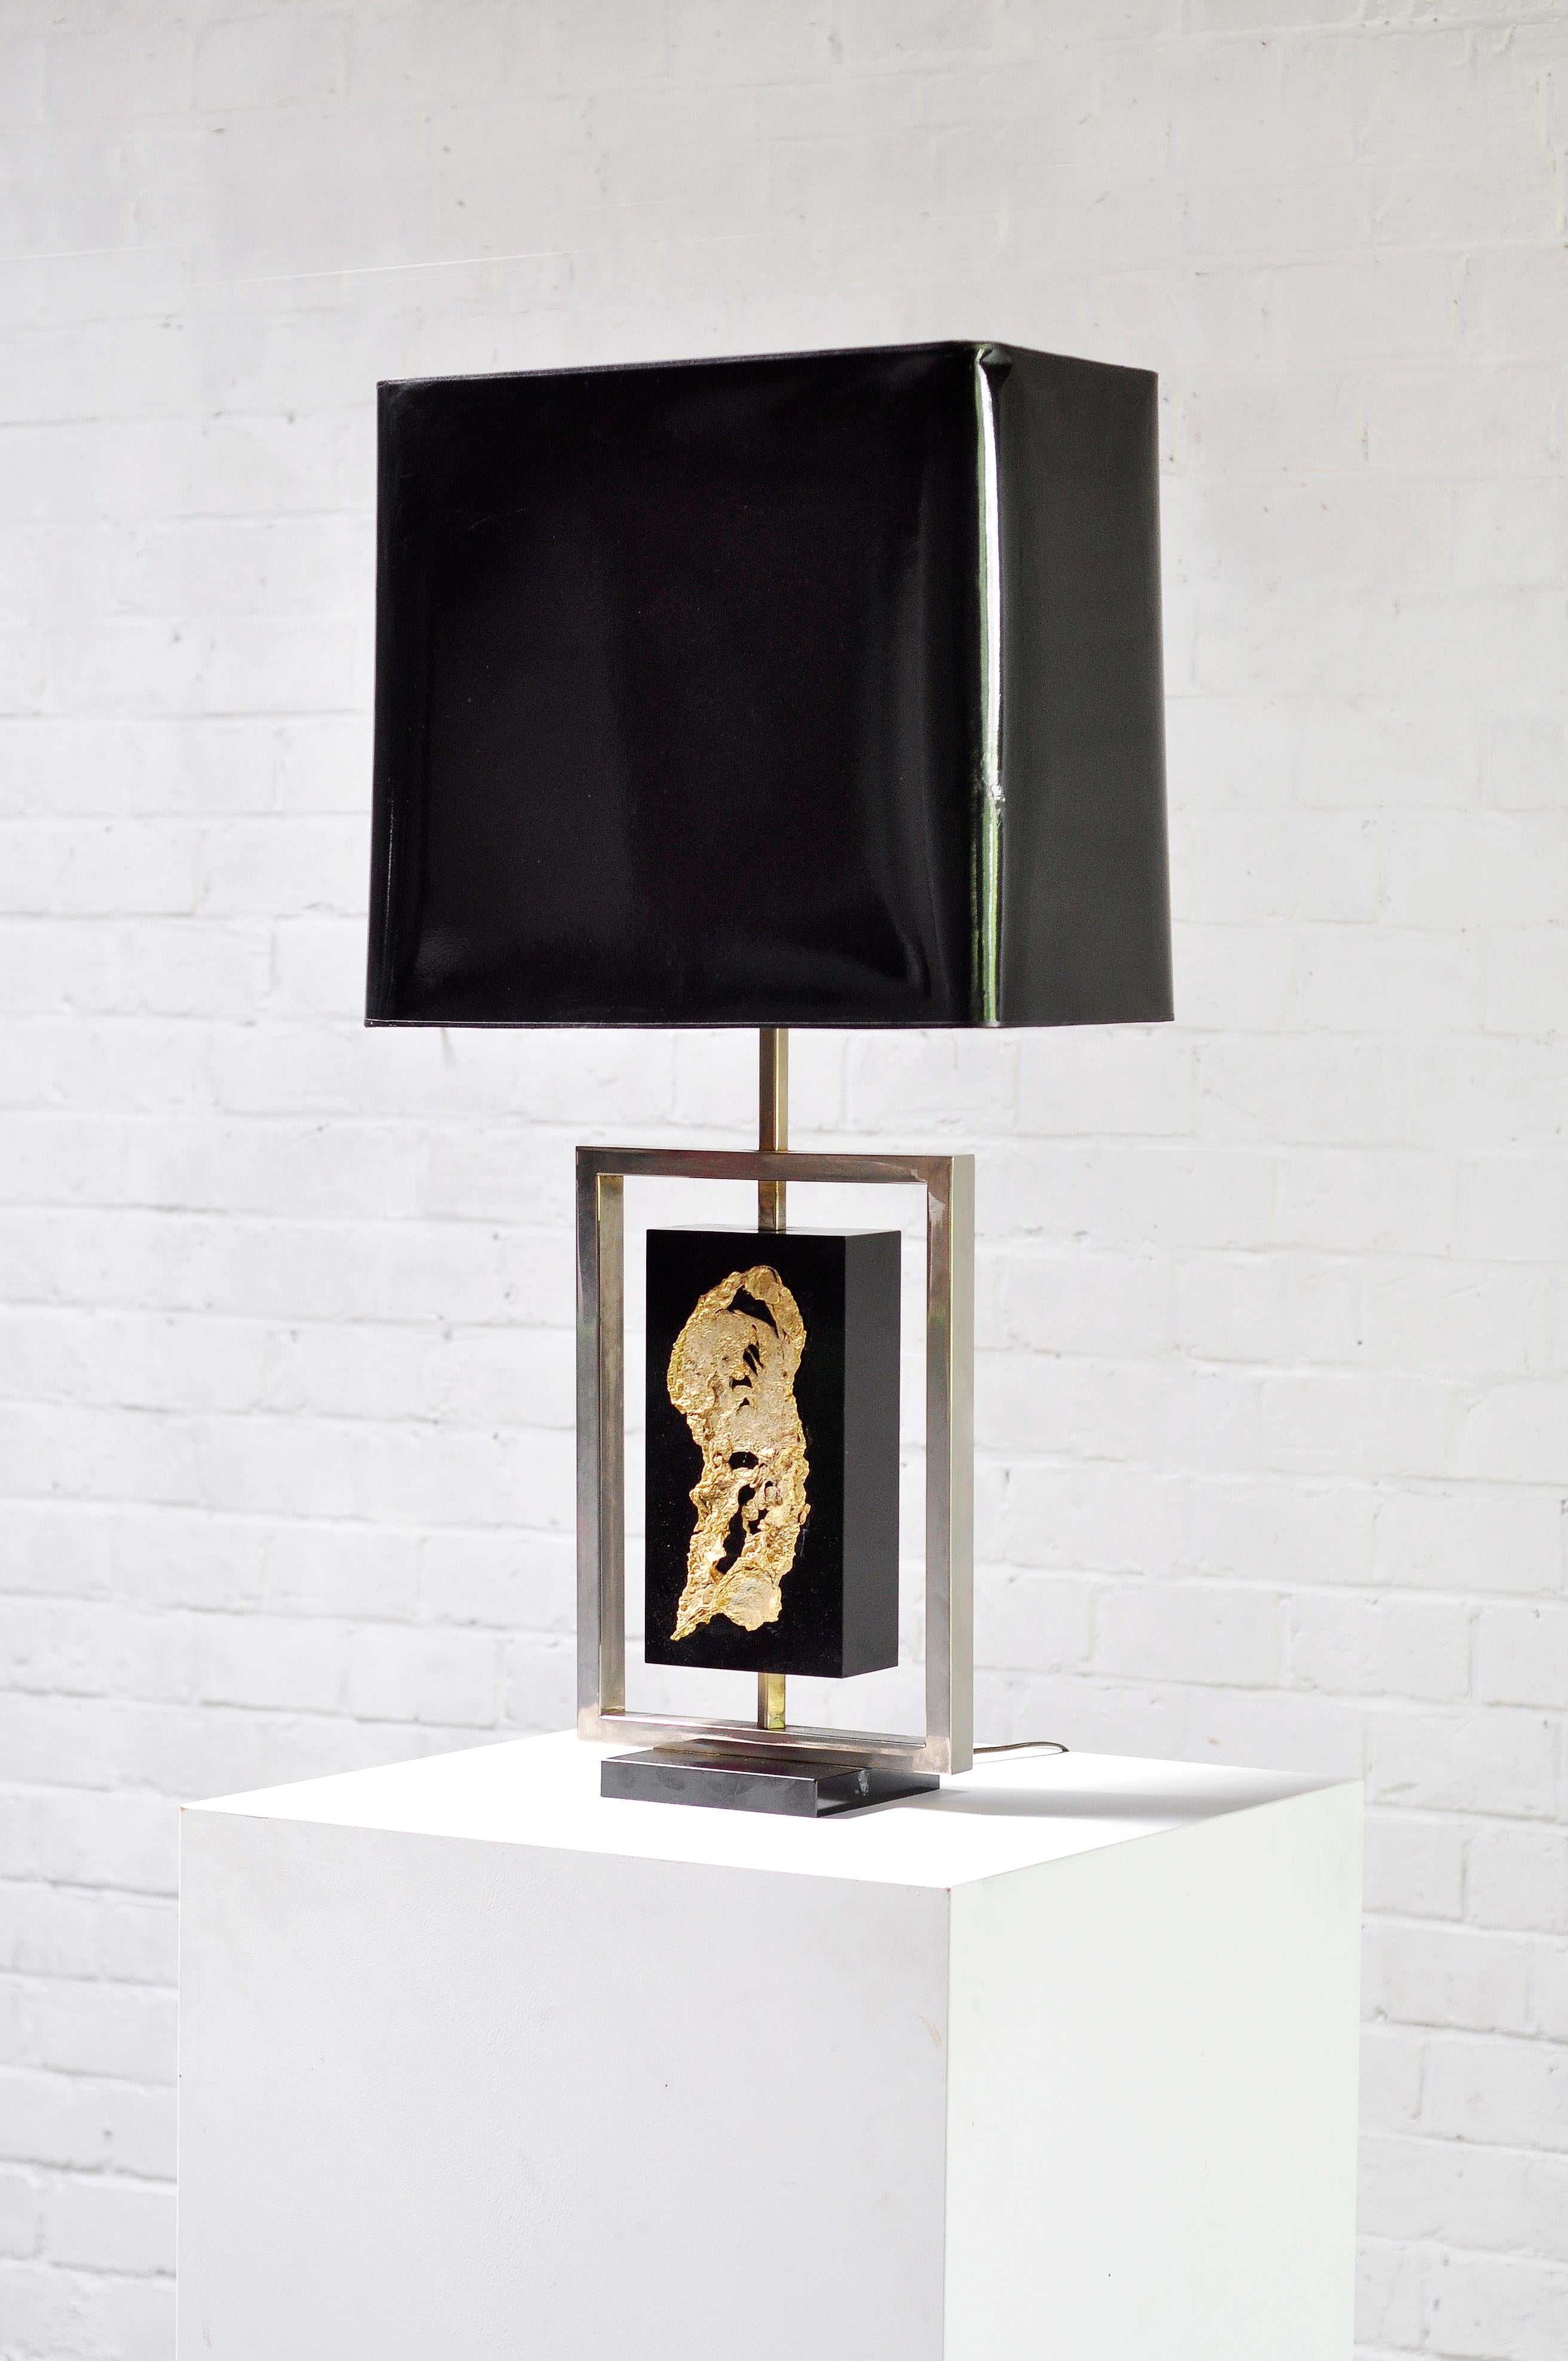 A distinctive large table lamp designed by Philippe Cheverny, French artist and designer in Paris in the 1970s. This lamp showcases a black laminated wood base with a metal framework and golden metal modernist decoration. The lamp allows for